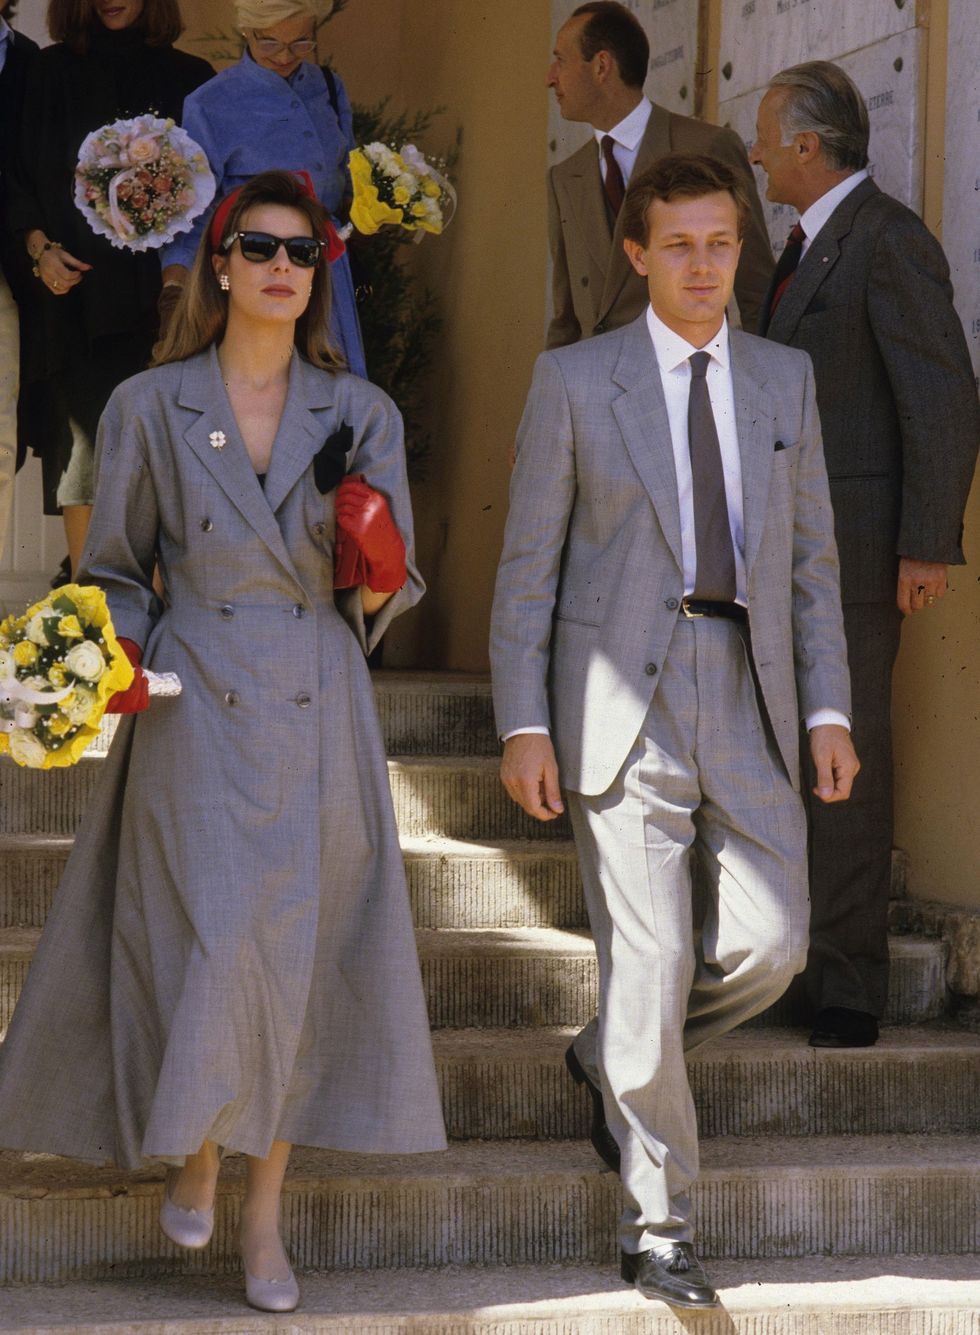 monaco   undated file photo  princess caroline of monaco, a member of the grimaldi family, walks down some steps with her second husband, stefano casiraghi in 1985 in monaco princess caroline married ernst august v, prince of hanover in 1999 and is also titled as caroline, princess of hanover she will be celebrating her 50th birthday on january 23rd photo by michel dufourwireimage